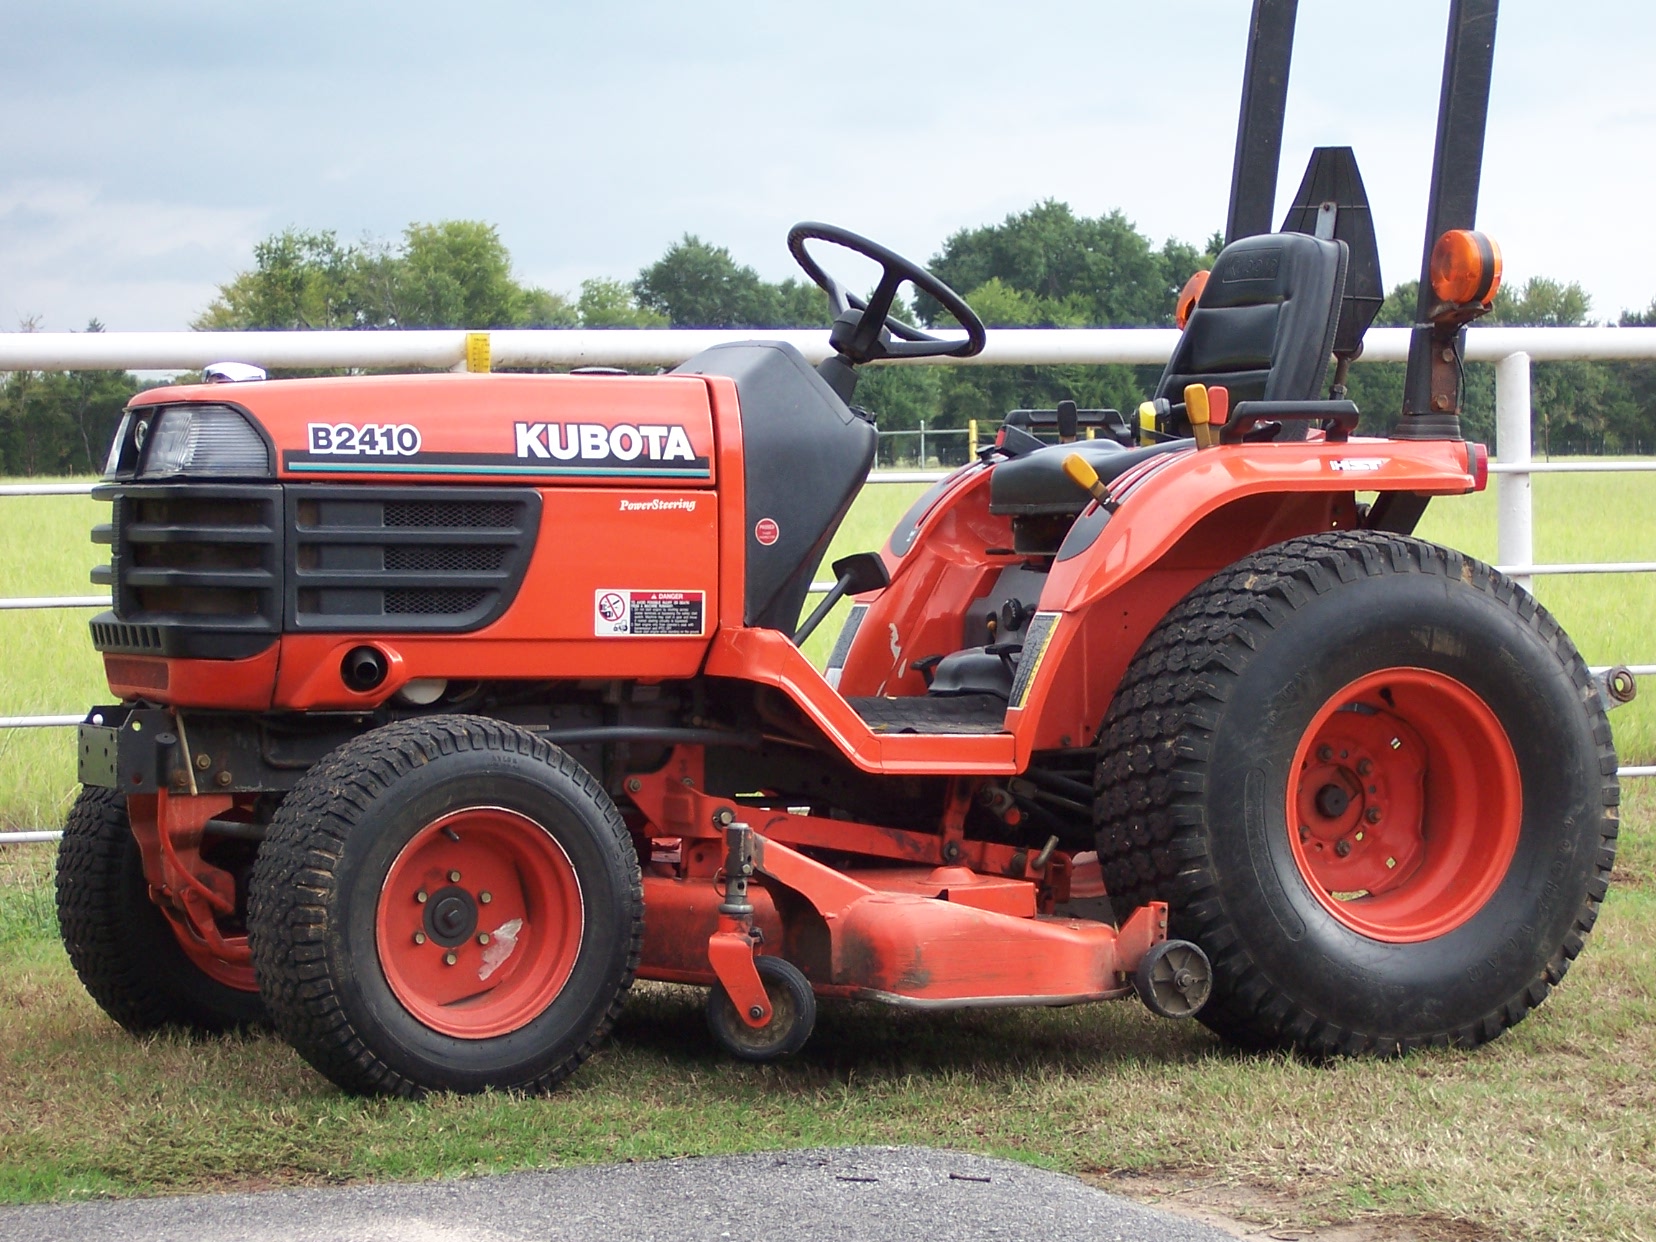 Kubota B2410 Tractor Price Specs Category Models List, Prices